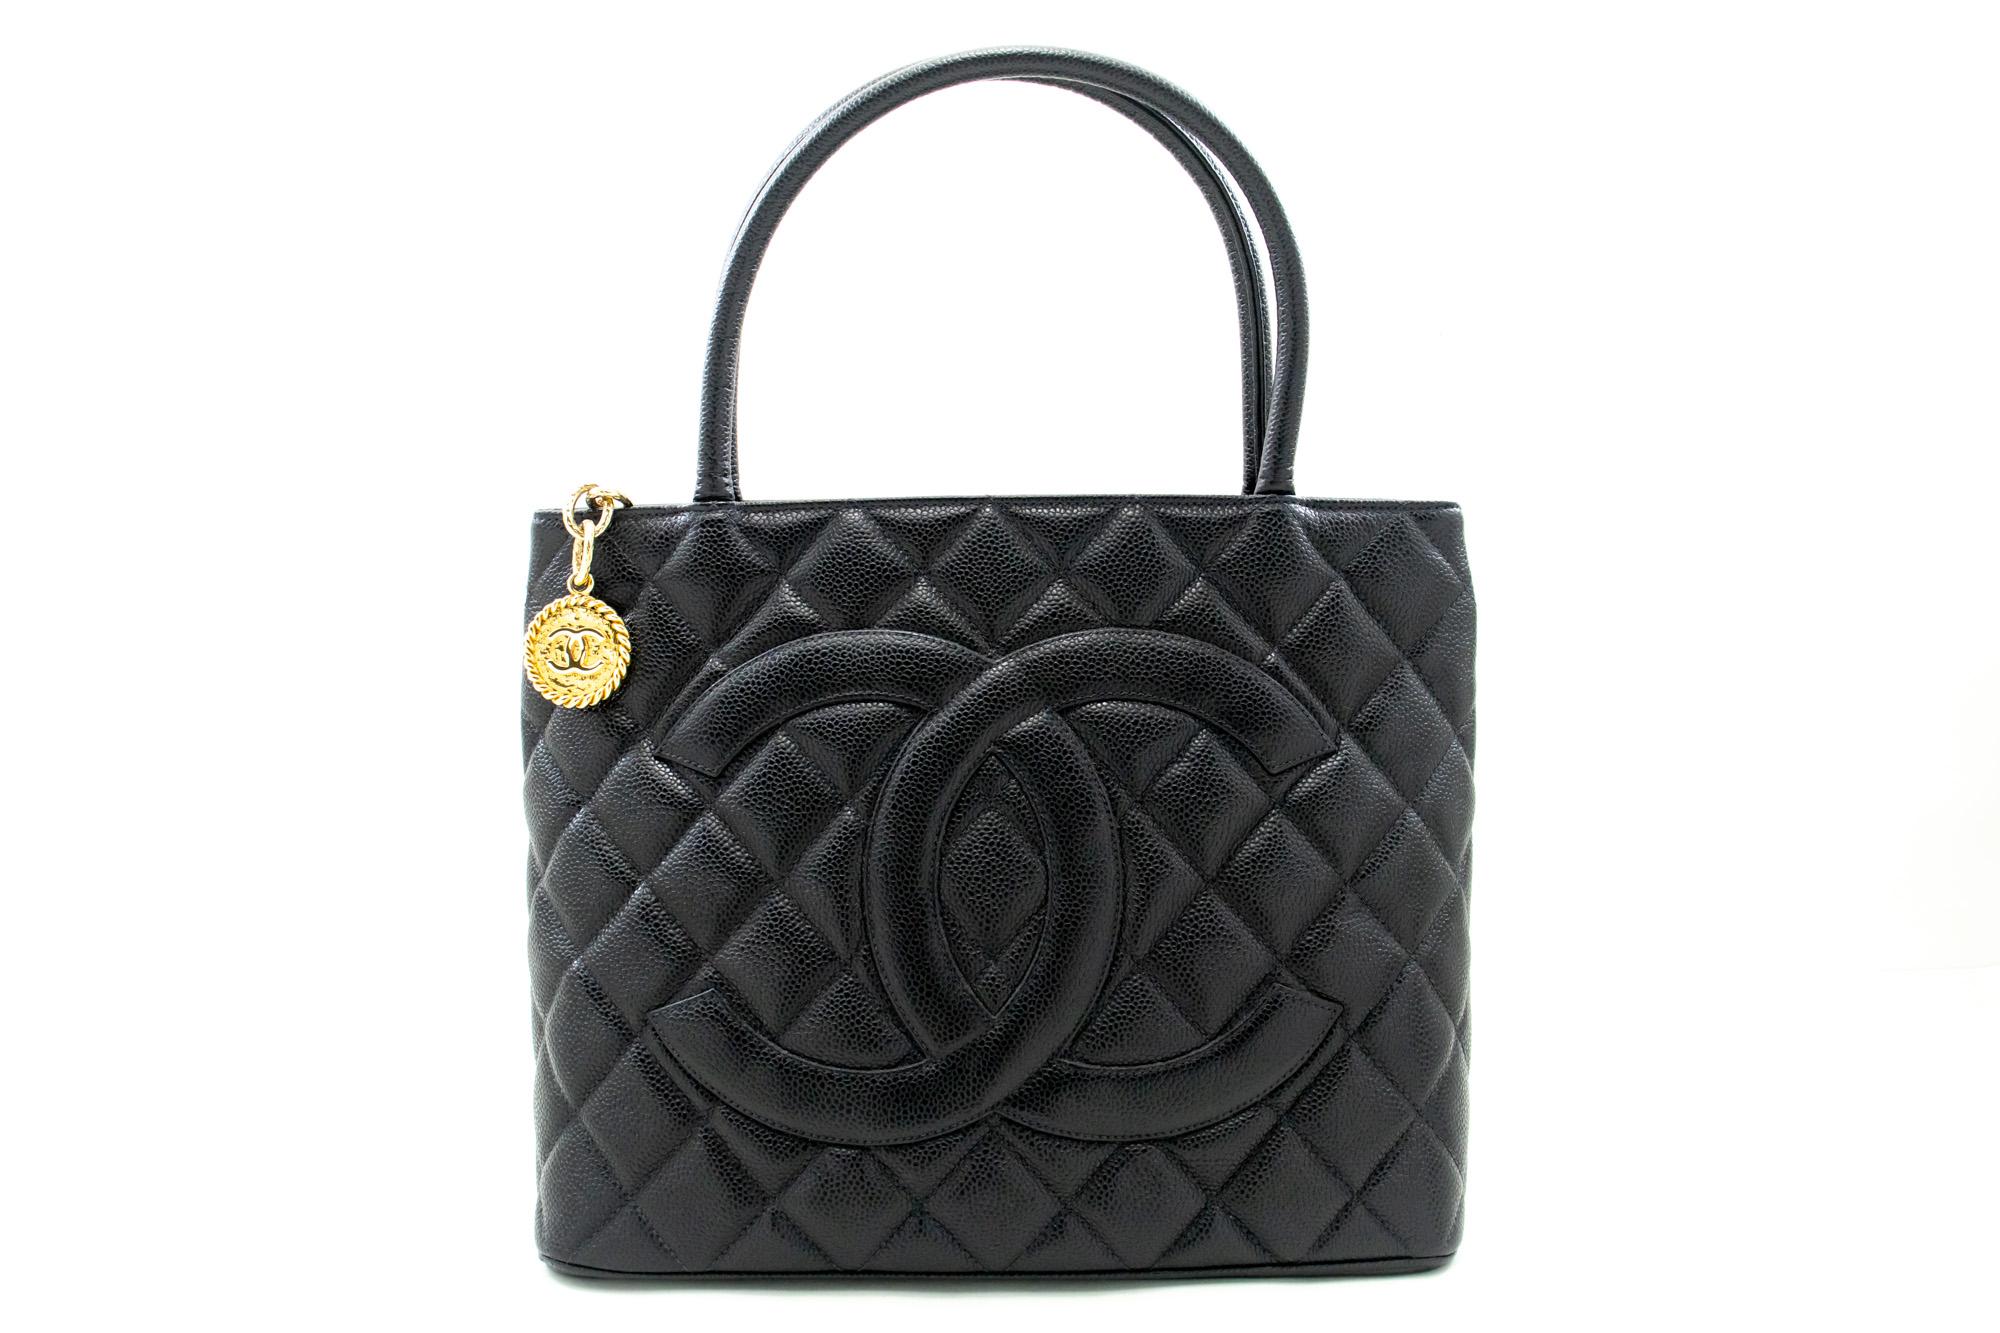 An authentic CHANEL Gold Medallion Caviar Shoulder Bag Grand Shopping Tote. The color is Black. The outside material is Leather. The pattern is Solid. This item is Vintage / Classic. The year of manufacture would be 2 0 0 2 .
Conditions &